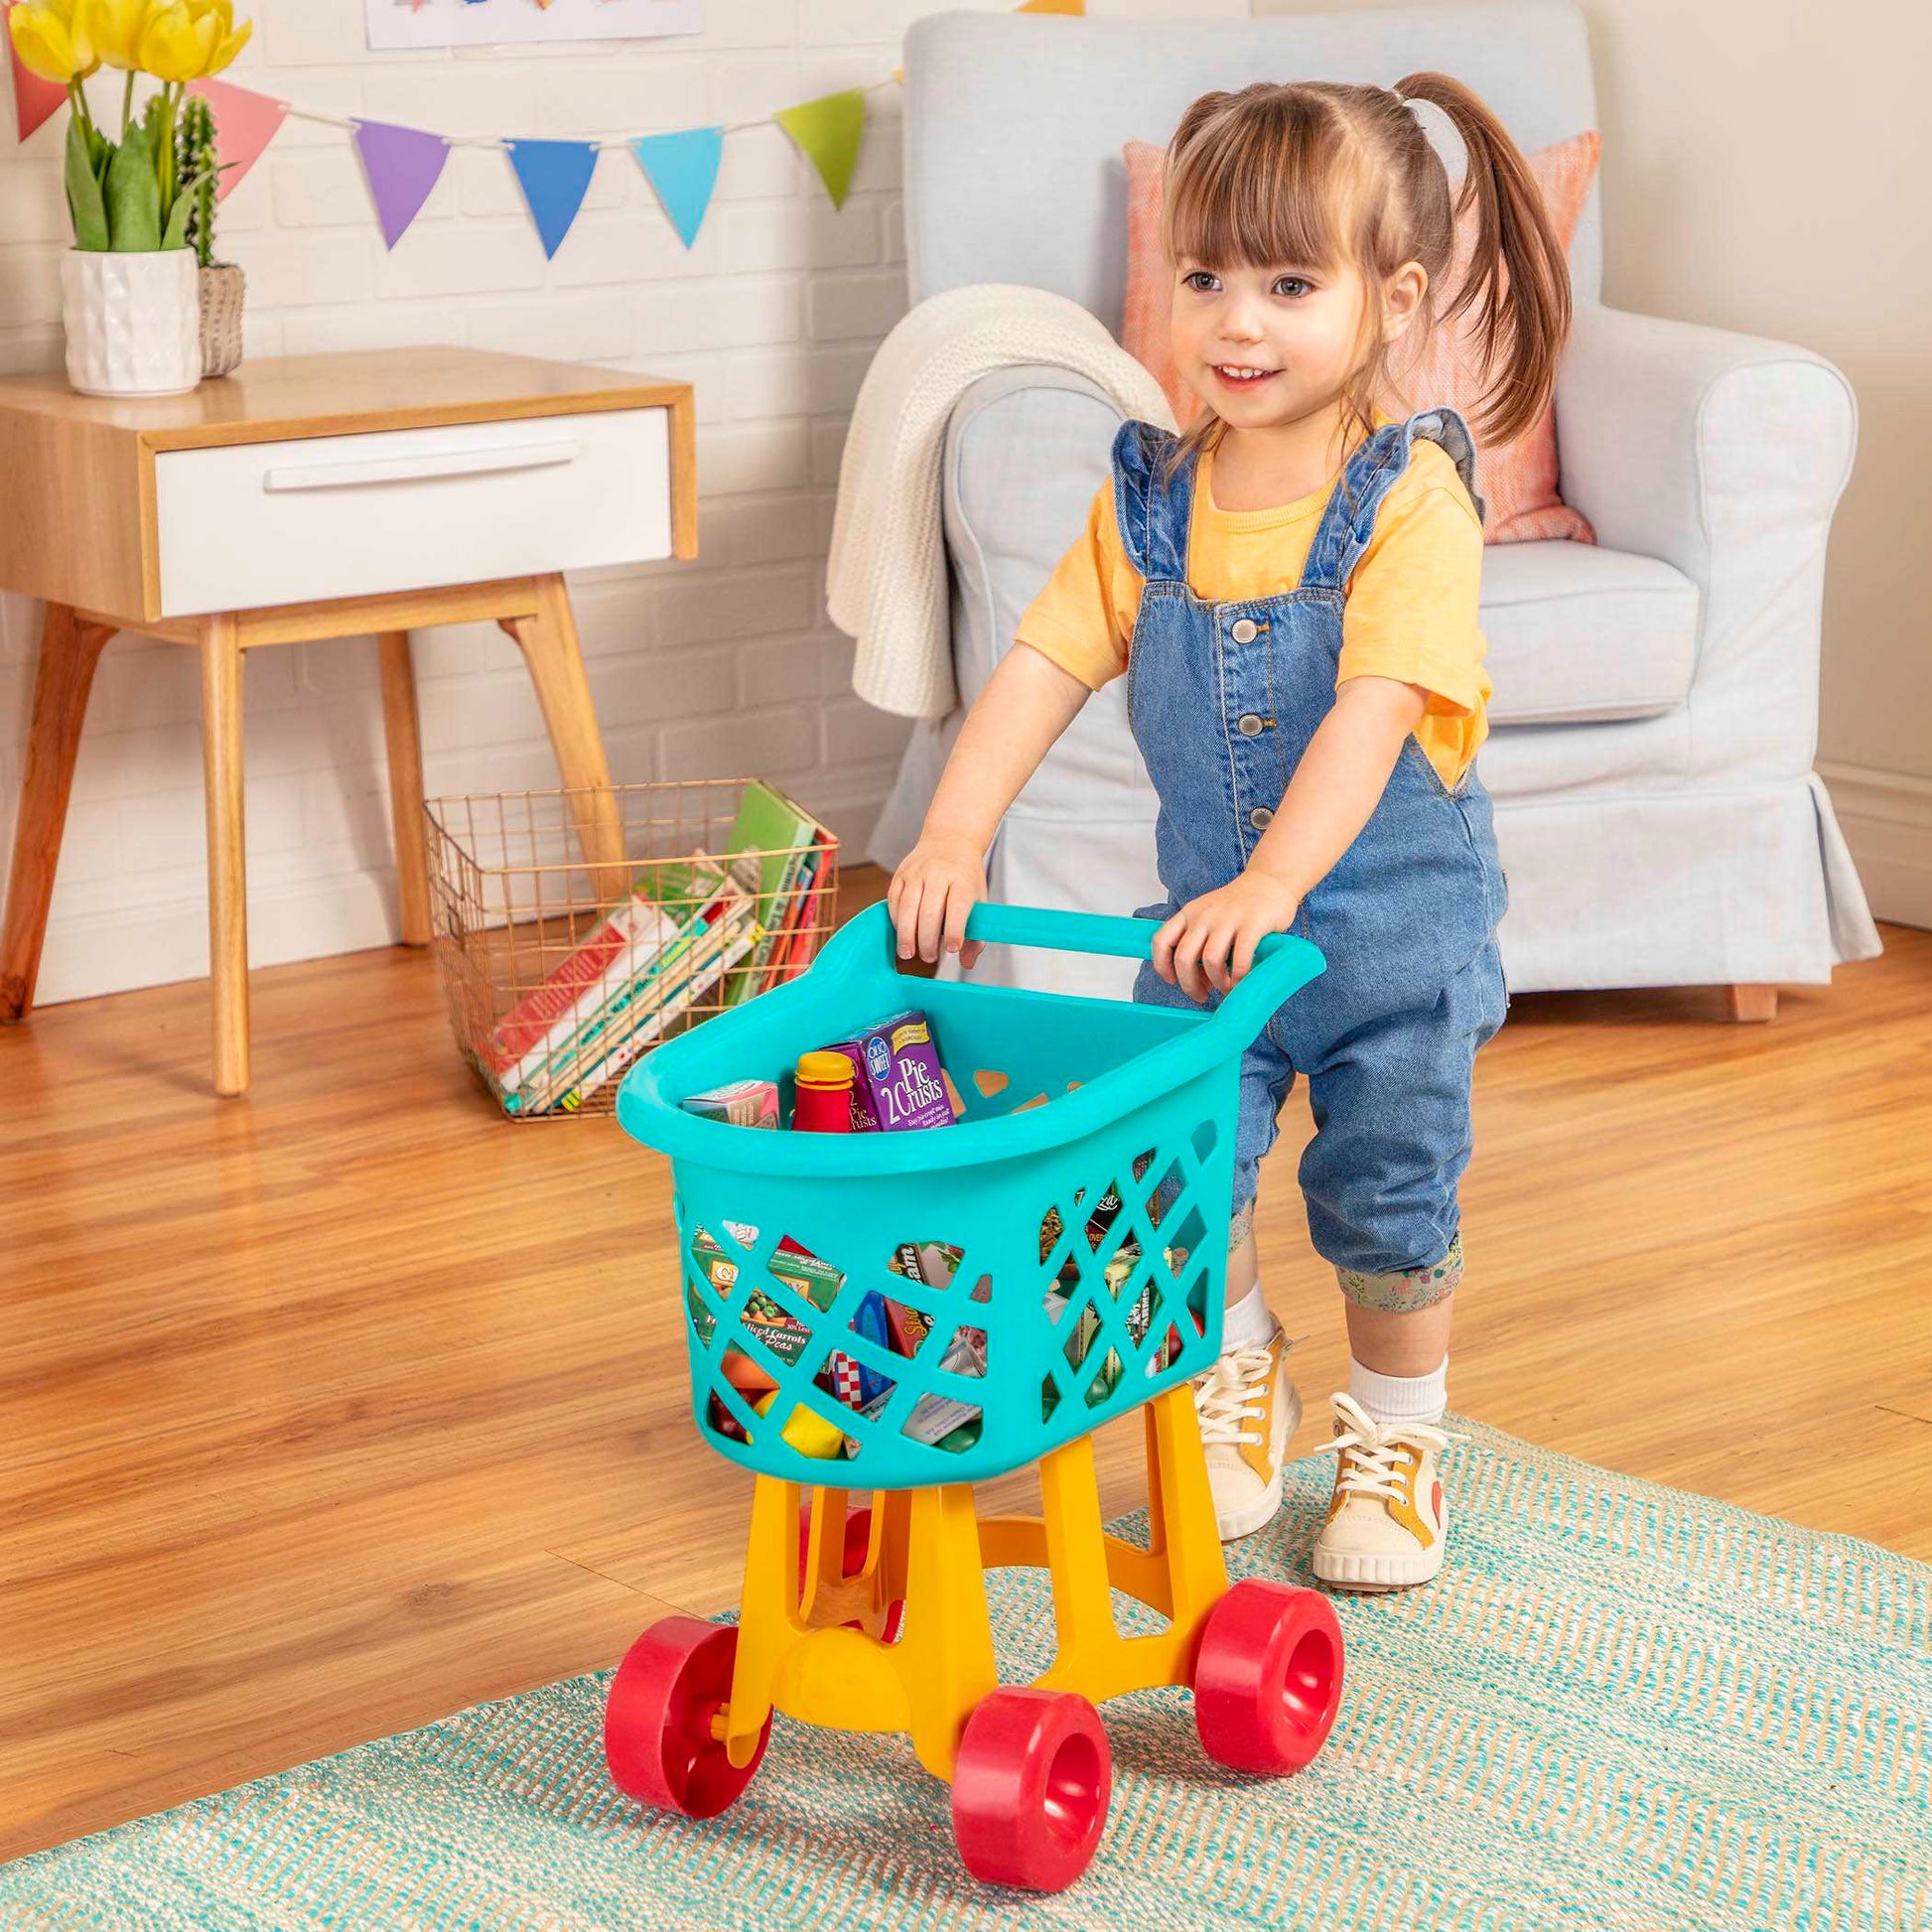 Battat Toy Grocery Cart - The Toy Wagon